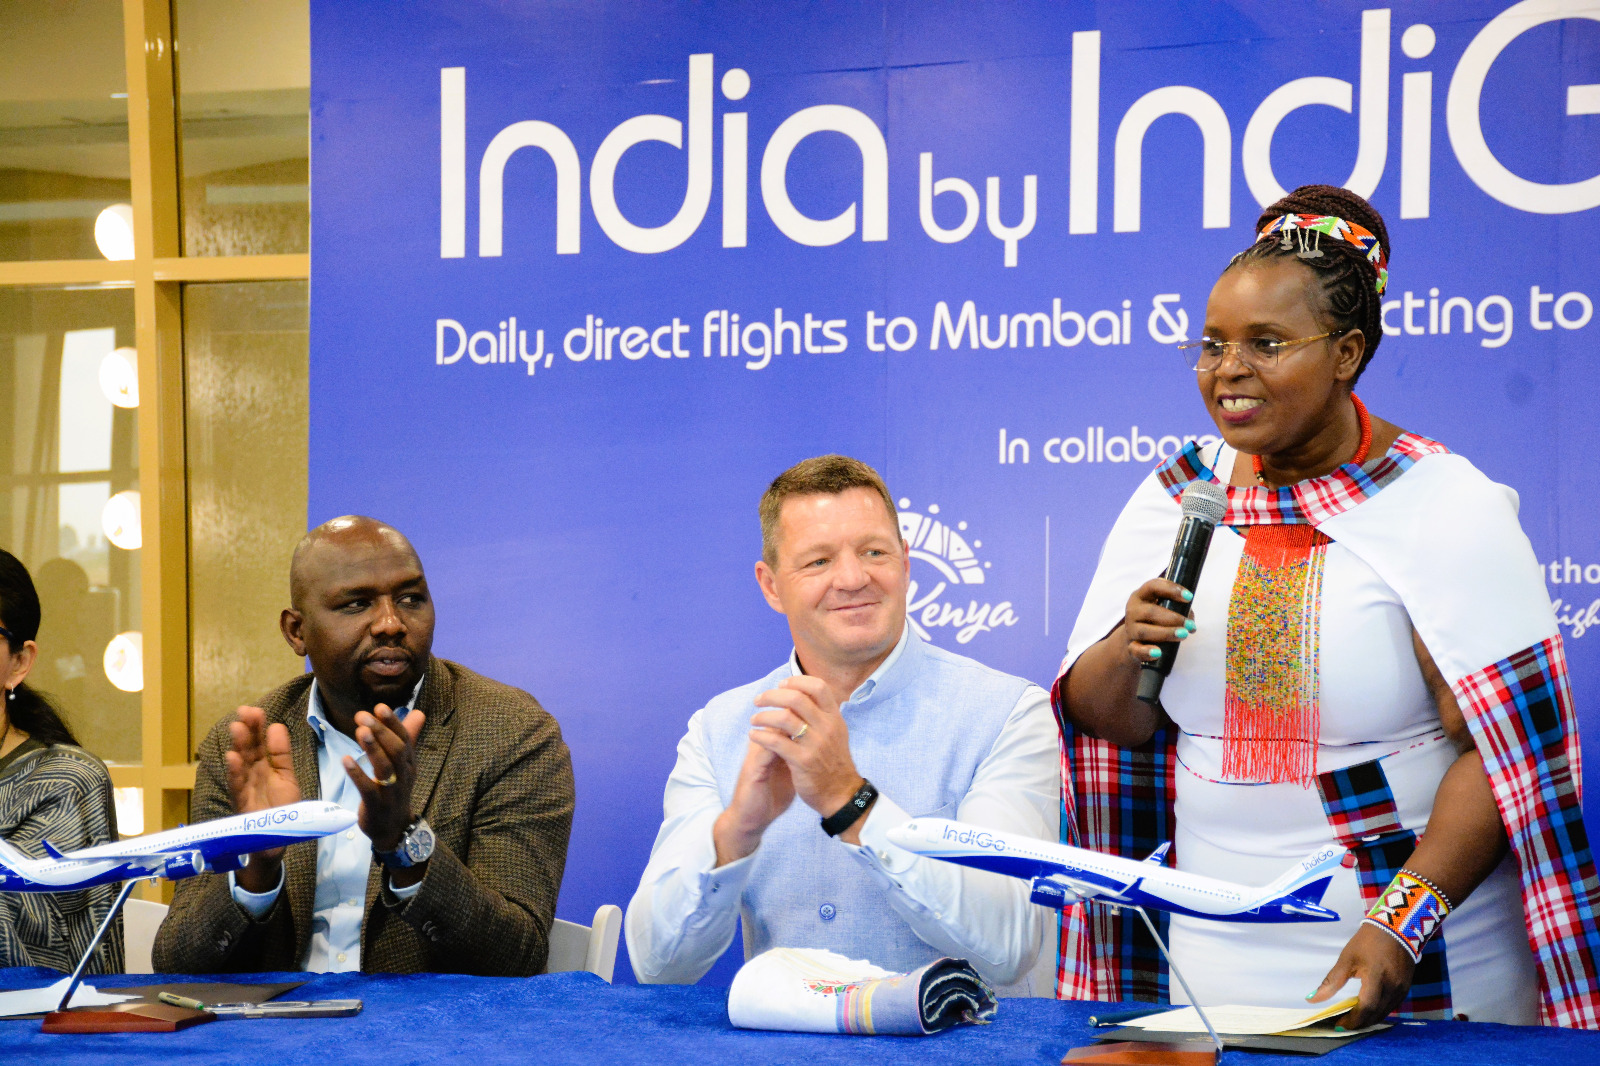 (Left to right): The Cabinet Secretary for Roads and Transport, Hon. Kipchumba Murkomen, and the Chief Executive Officer of IndiGo Air, Mr. Pieter Elbers, listen on as the Cabinet Secretary for Tourism, Wildlife, and Heritage, Hon. Peninah Malonza, addresses the media.